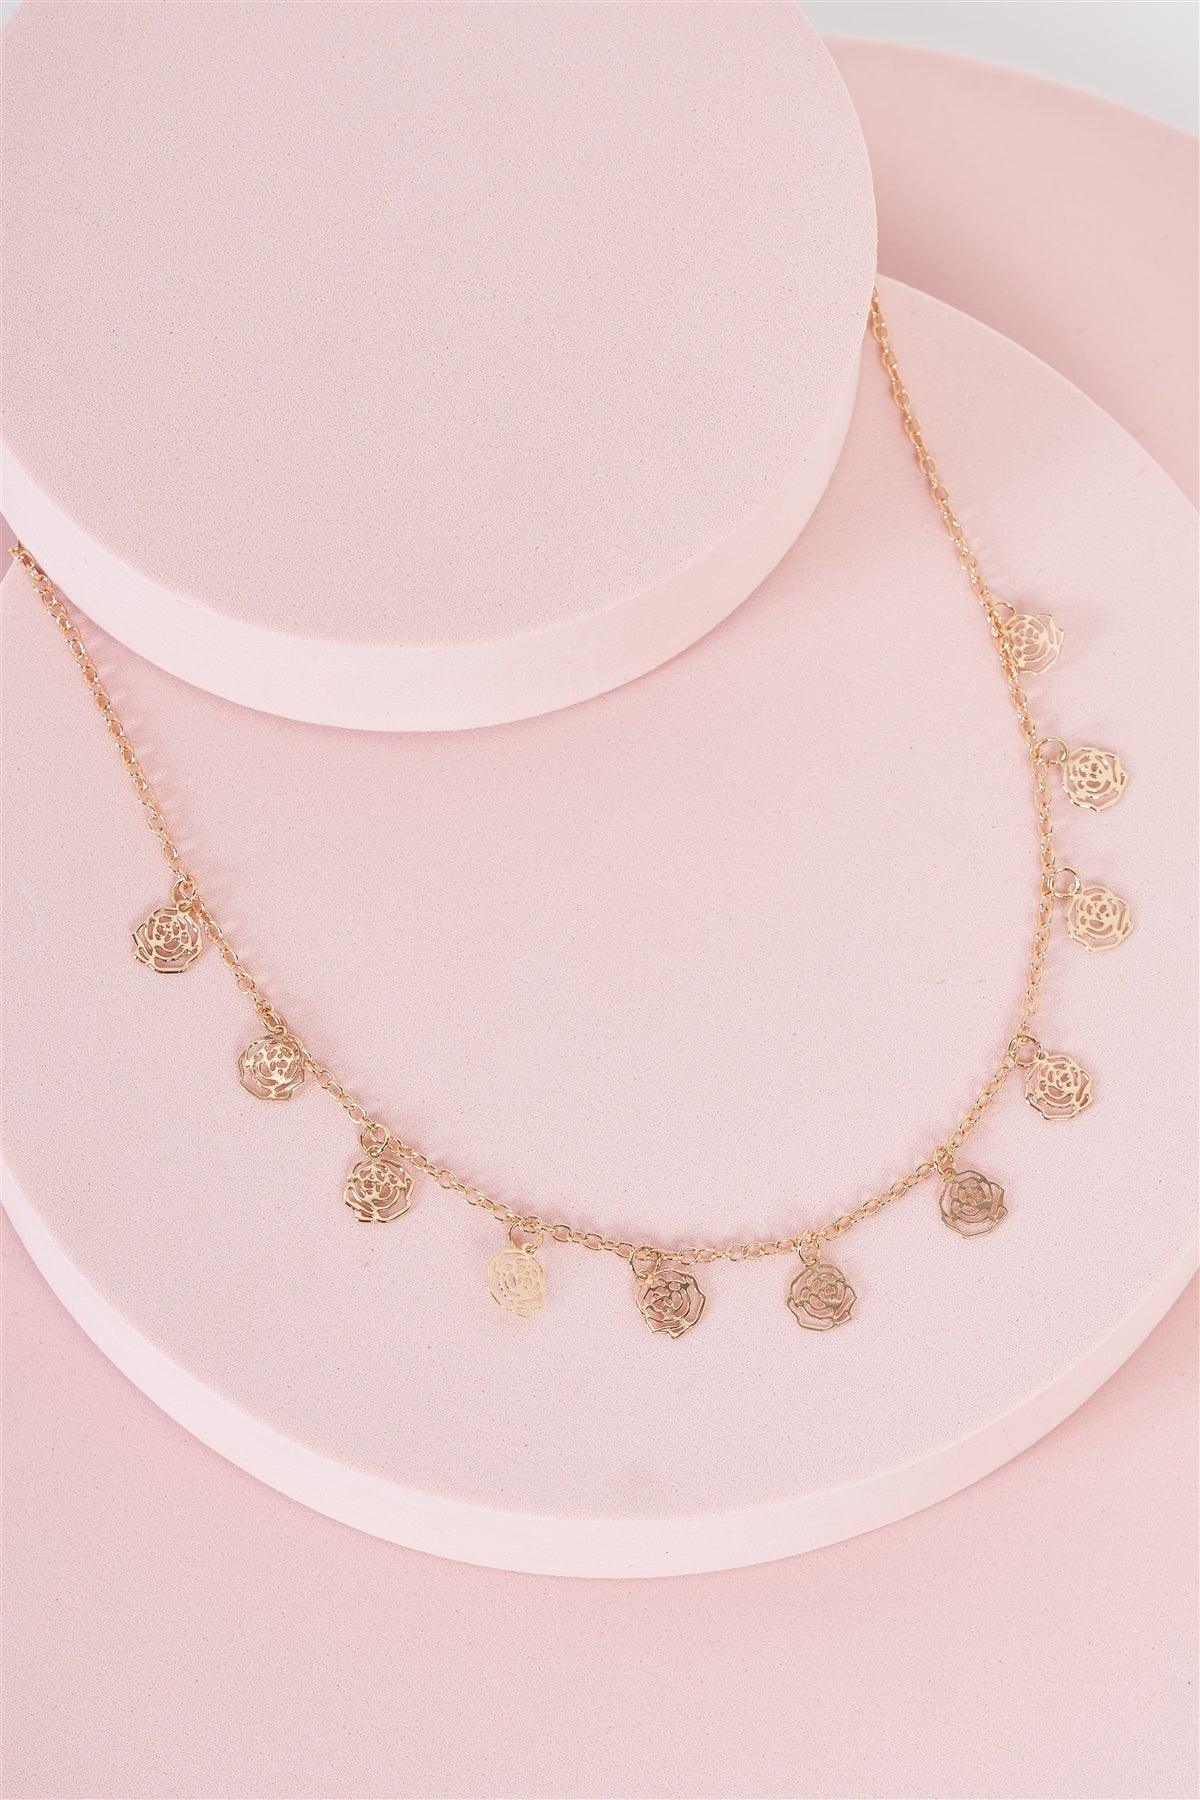 Gold Chain Charmed Outline Rose Necklace /3 Pieces